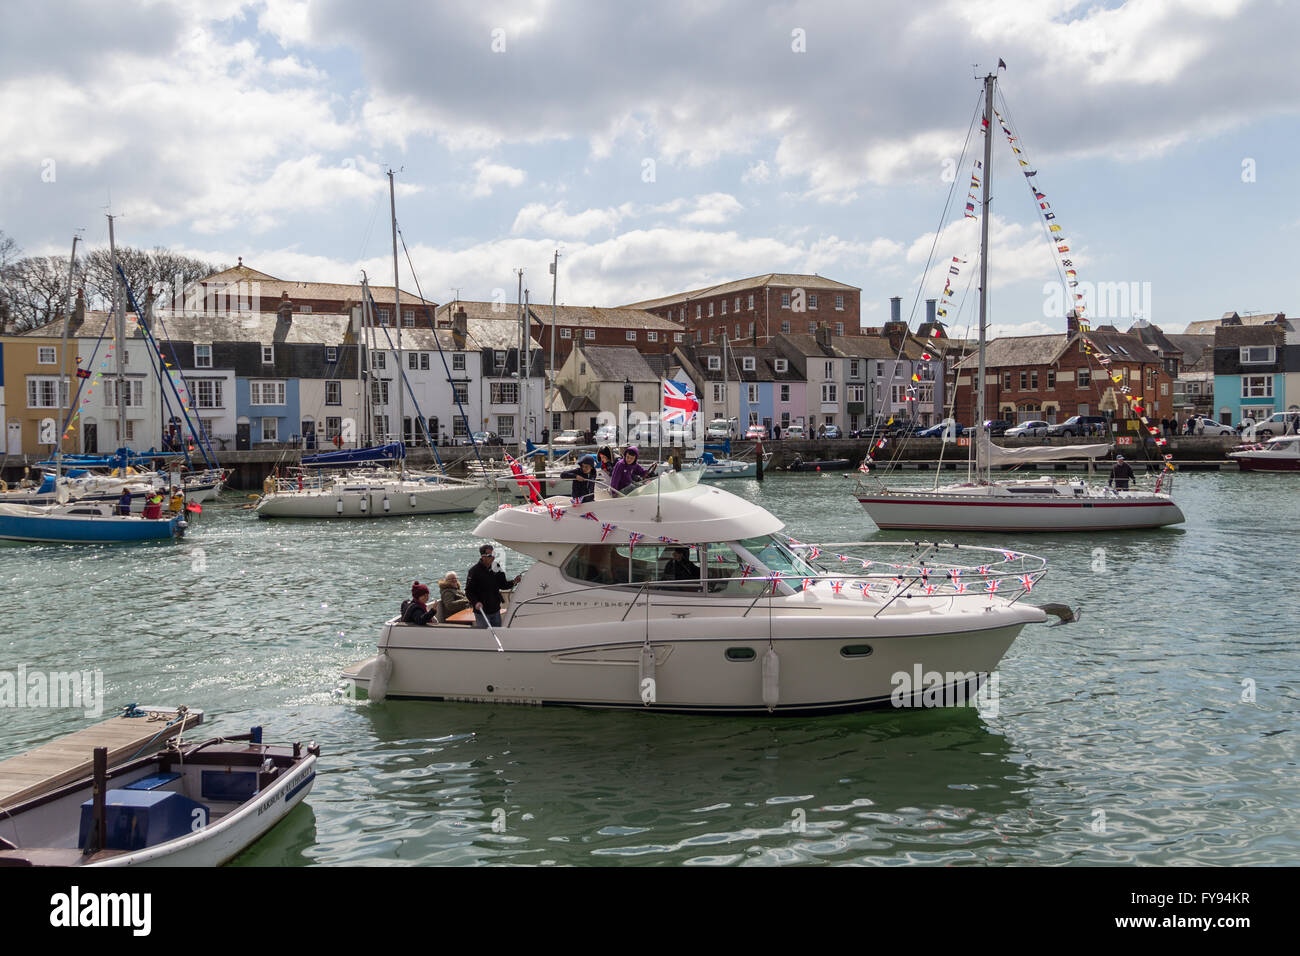 Weymouth, England. 23 April 2016. Queen's 90th Birthday Floating Tribute. Merry Fishe. Credit:  Frances Underwood/Alamy Live News Stock Photo